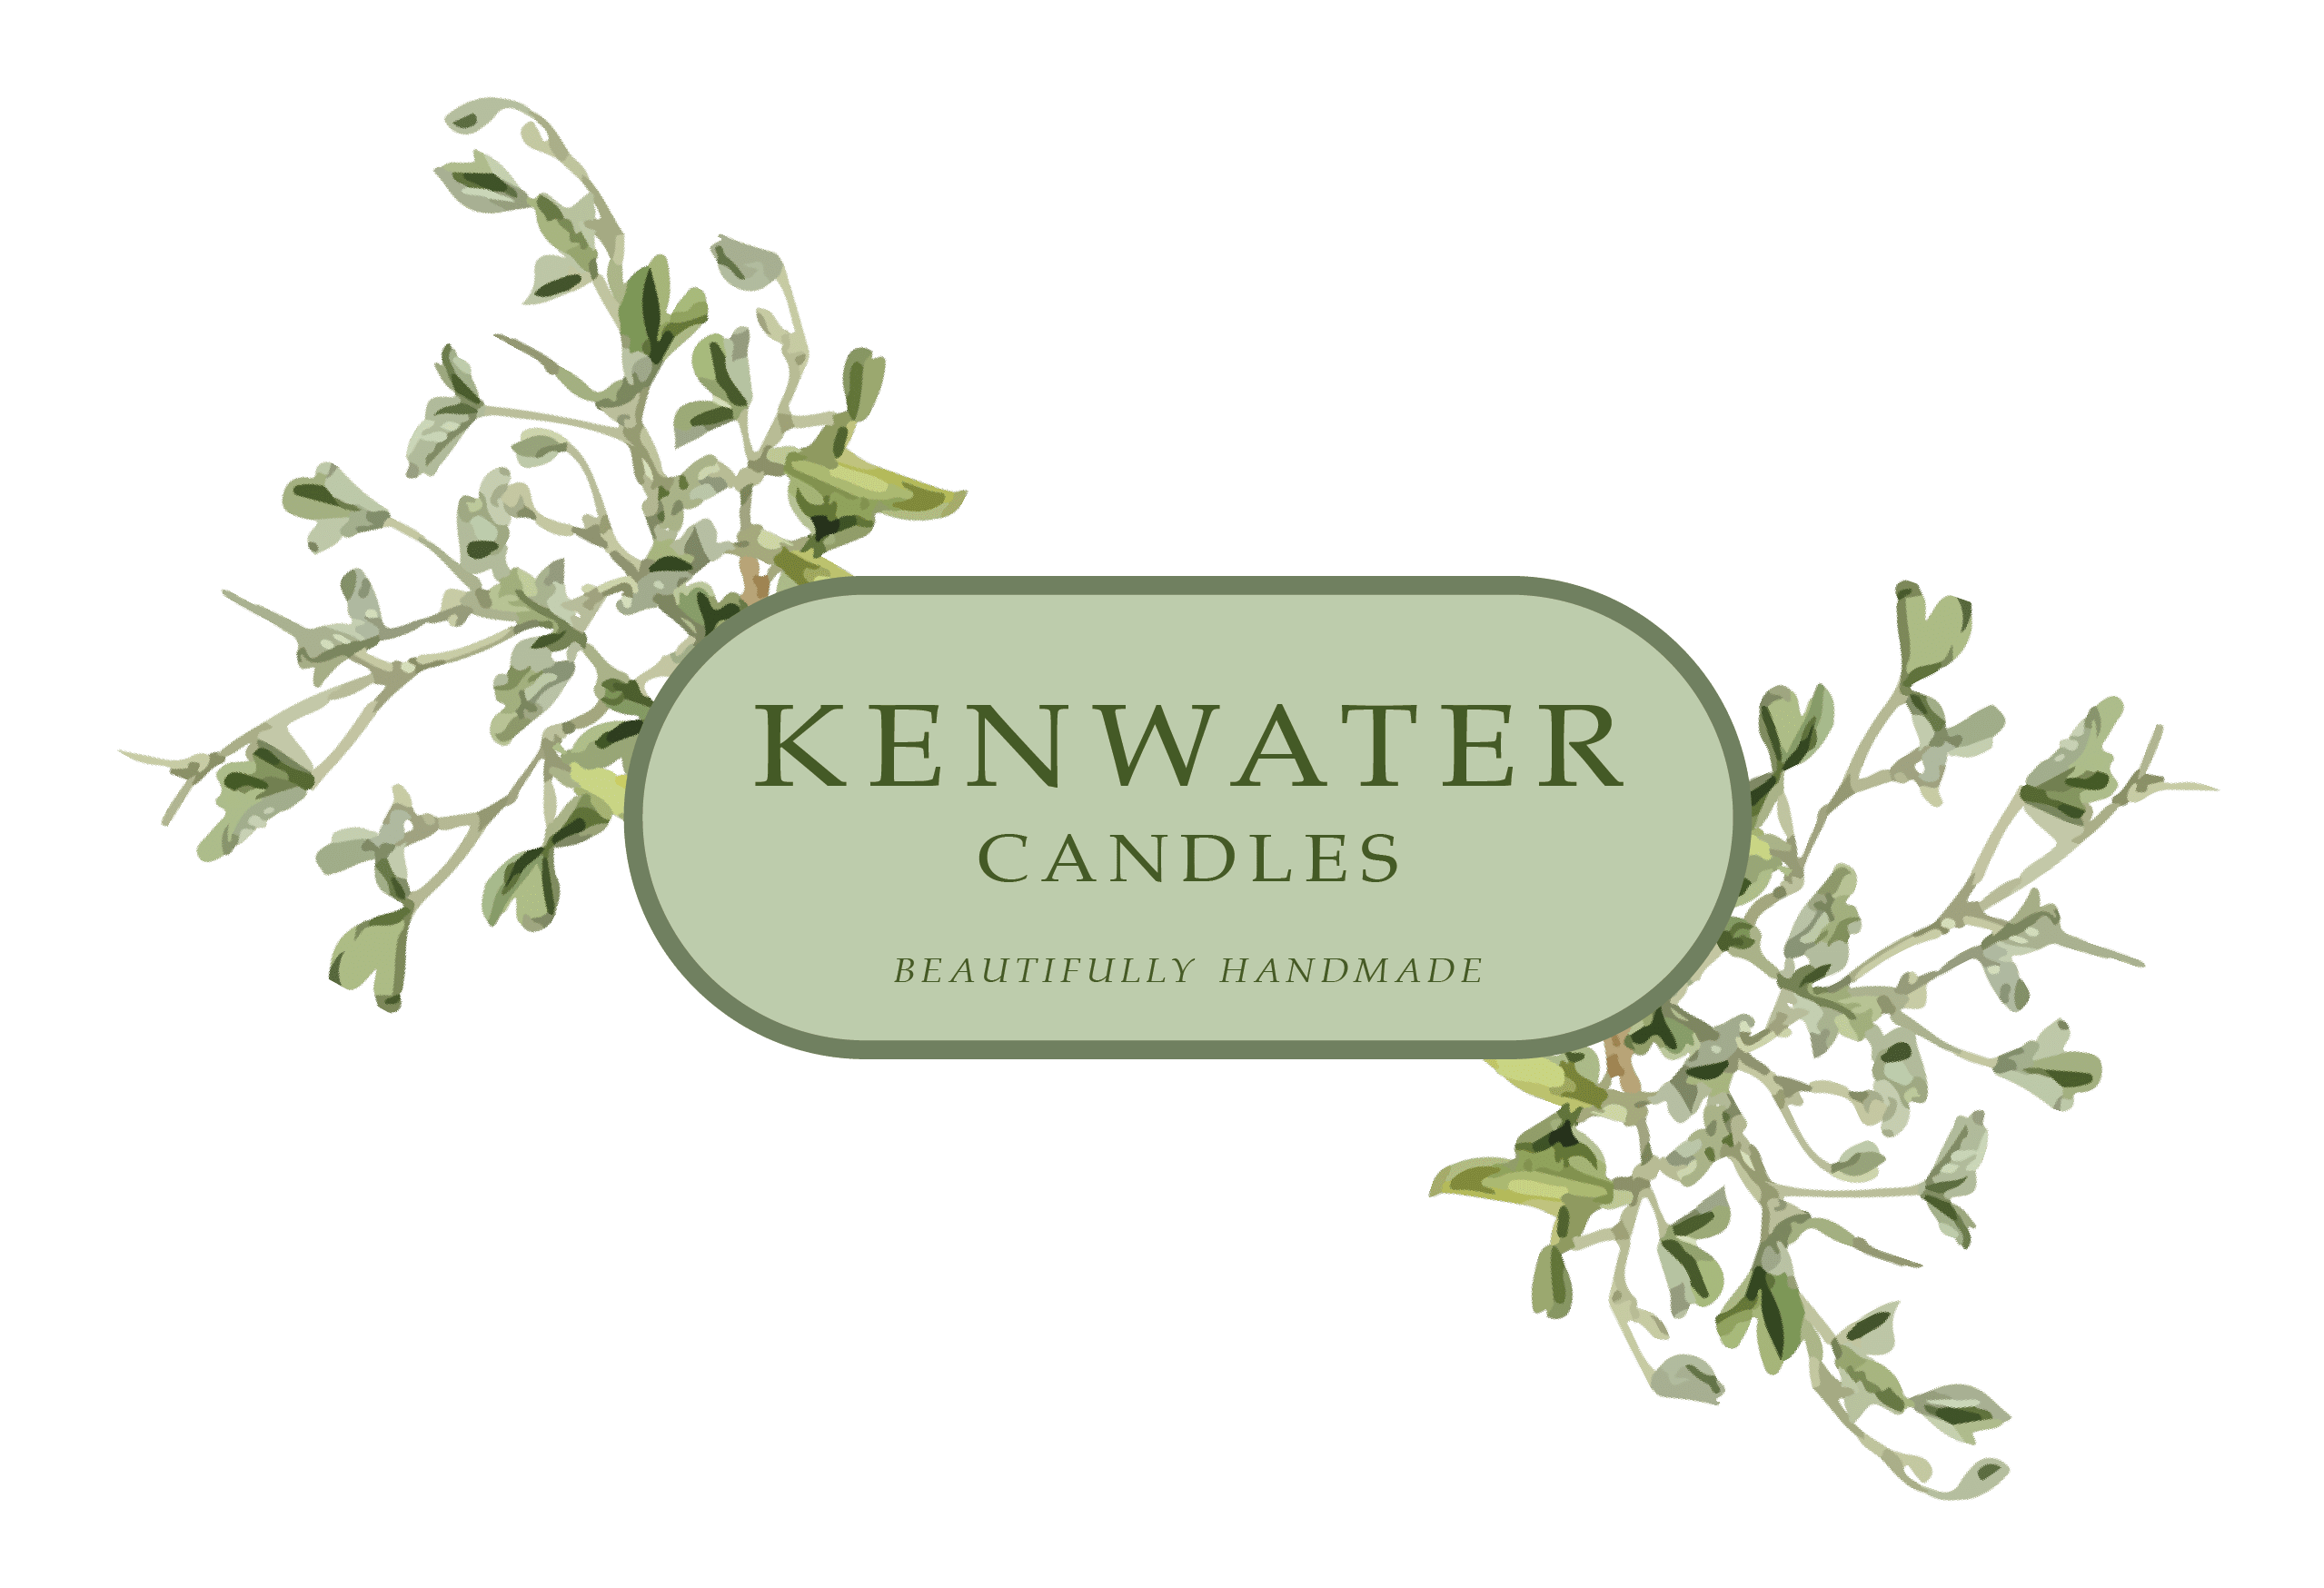 Kenwater Candles